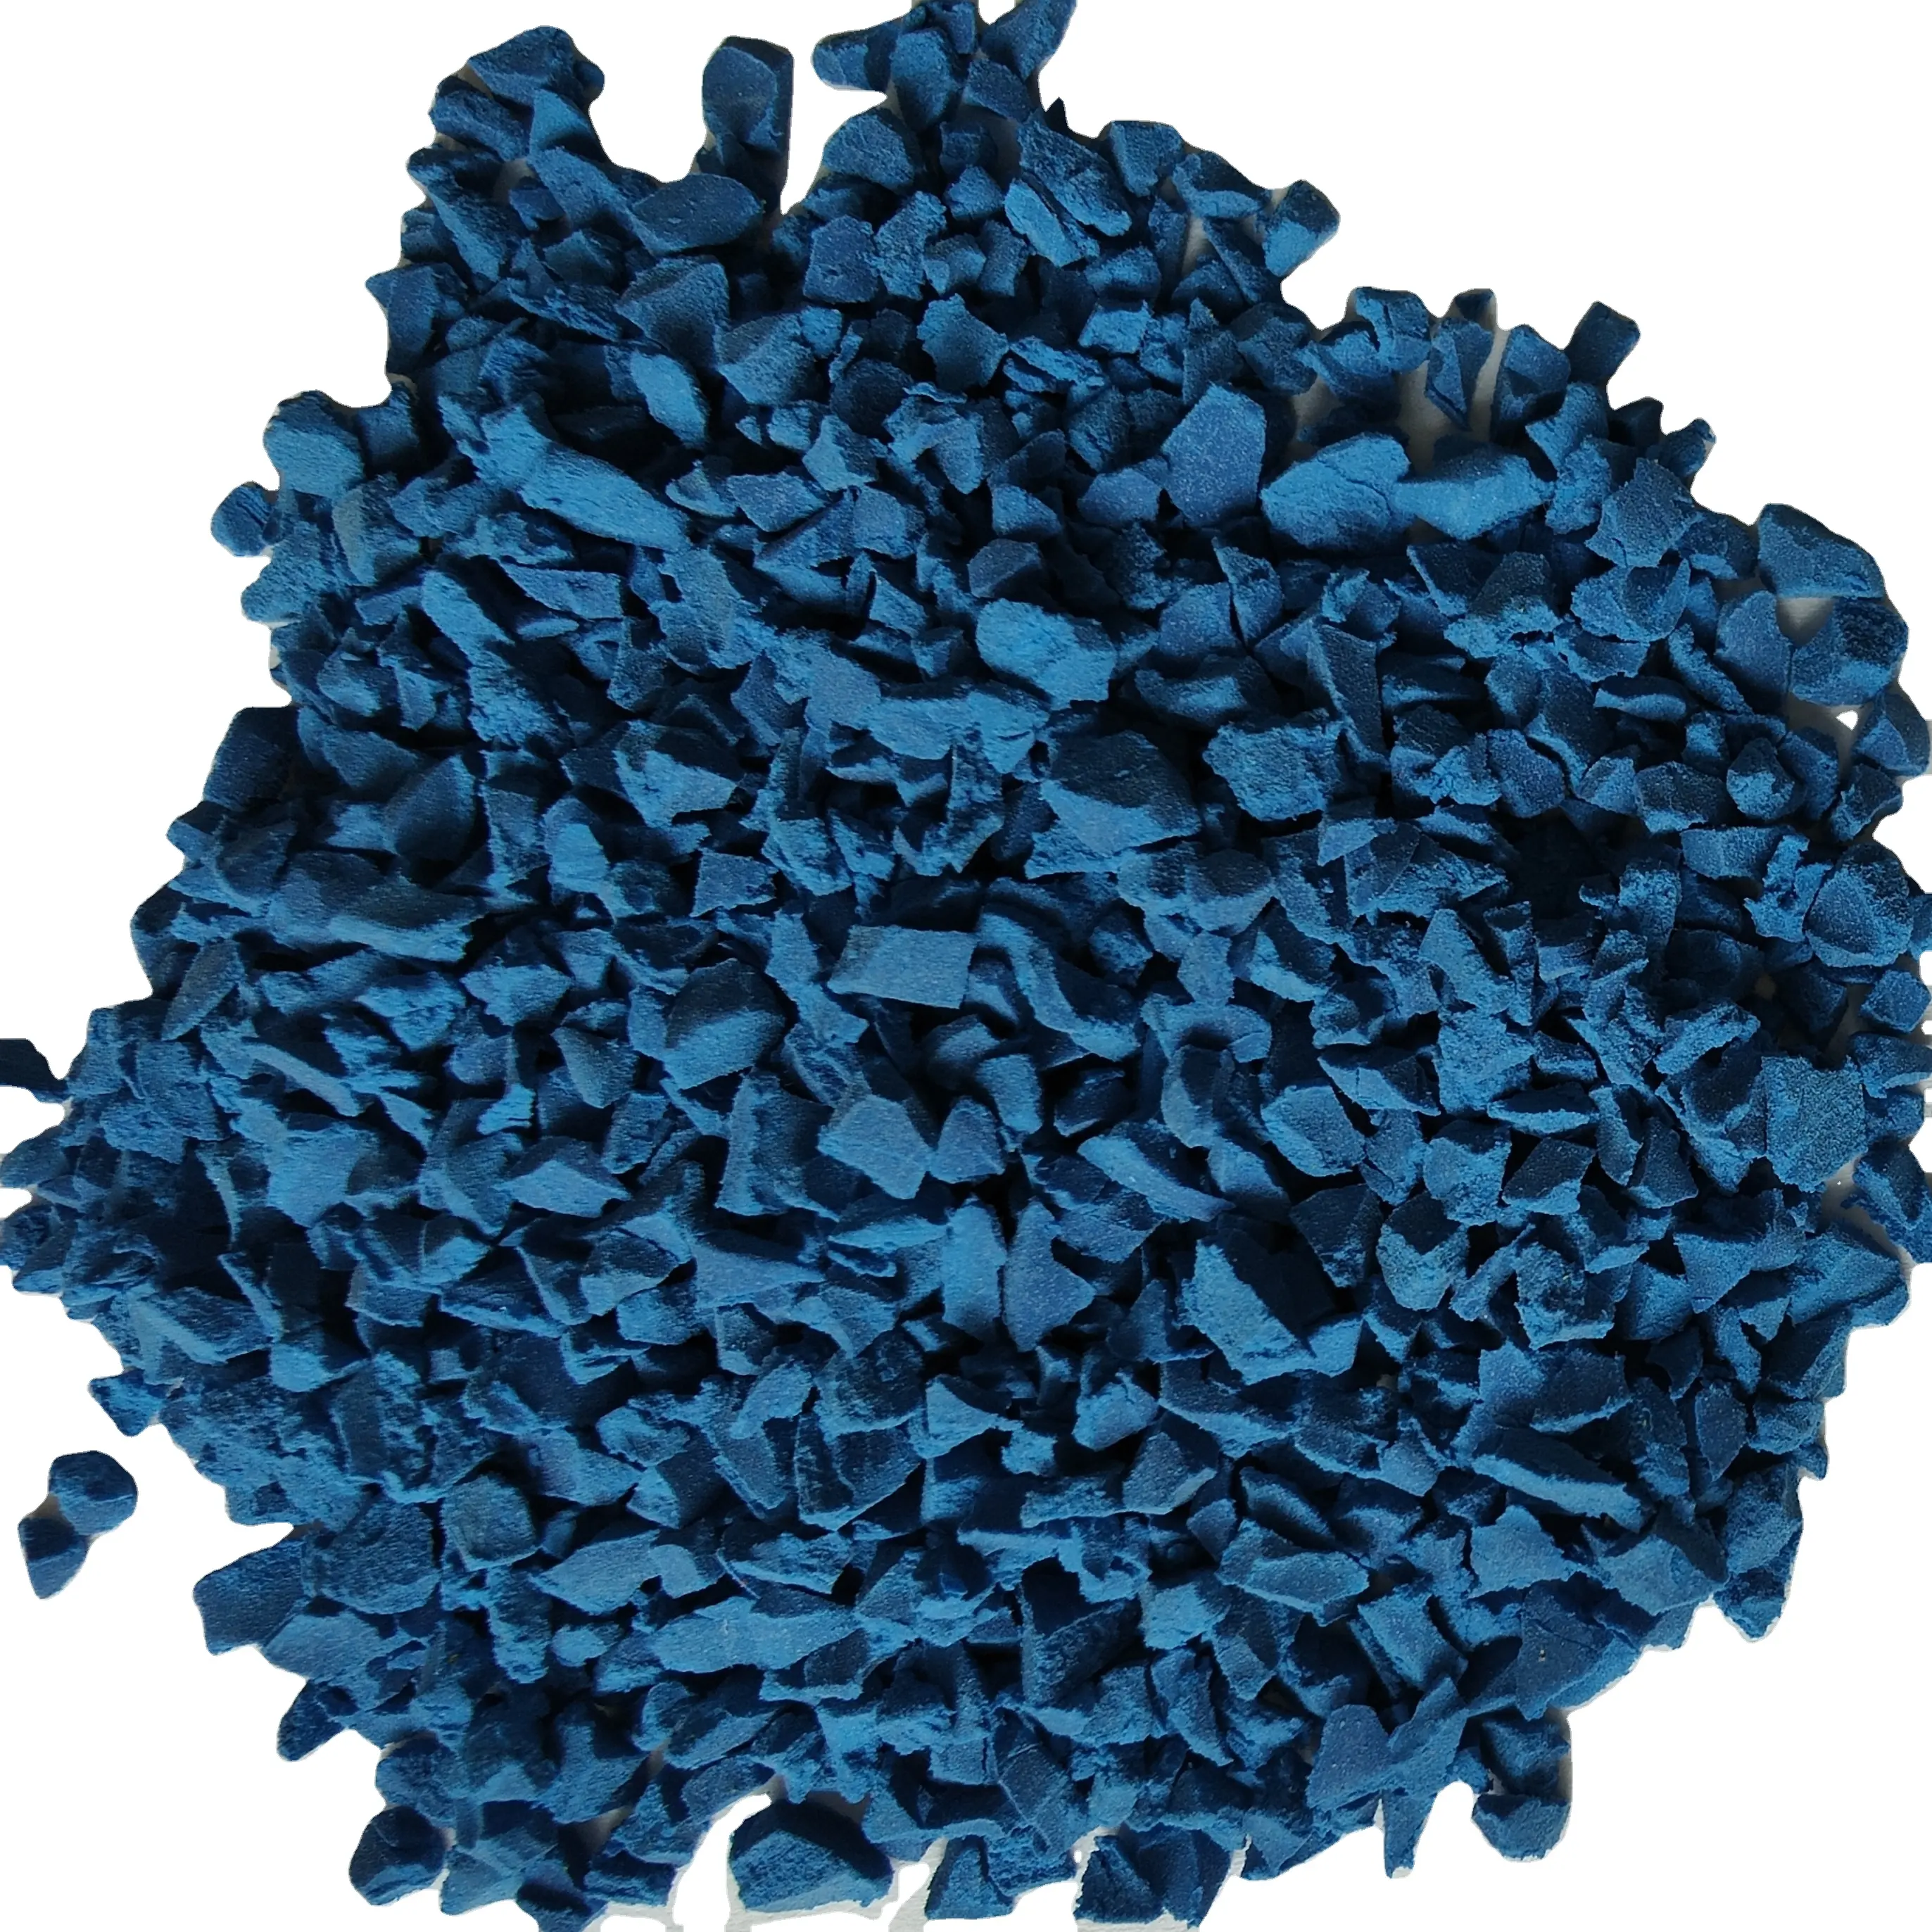 Dark Blue EPDM rubber granules Plastic running track School playground High quality sports rubber material Manufacturer price